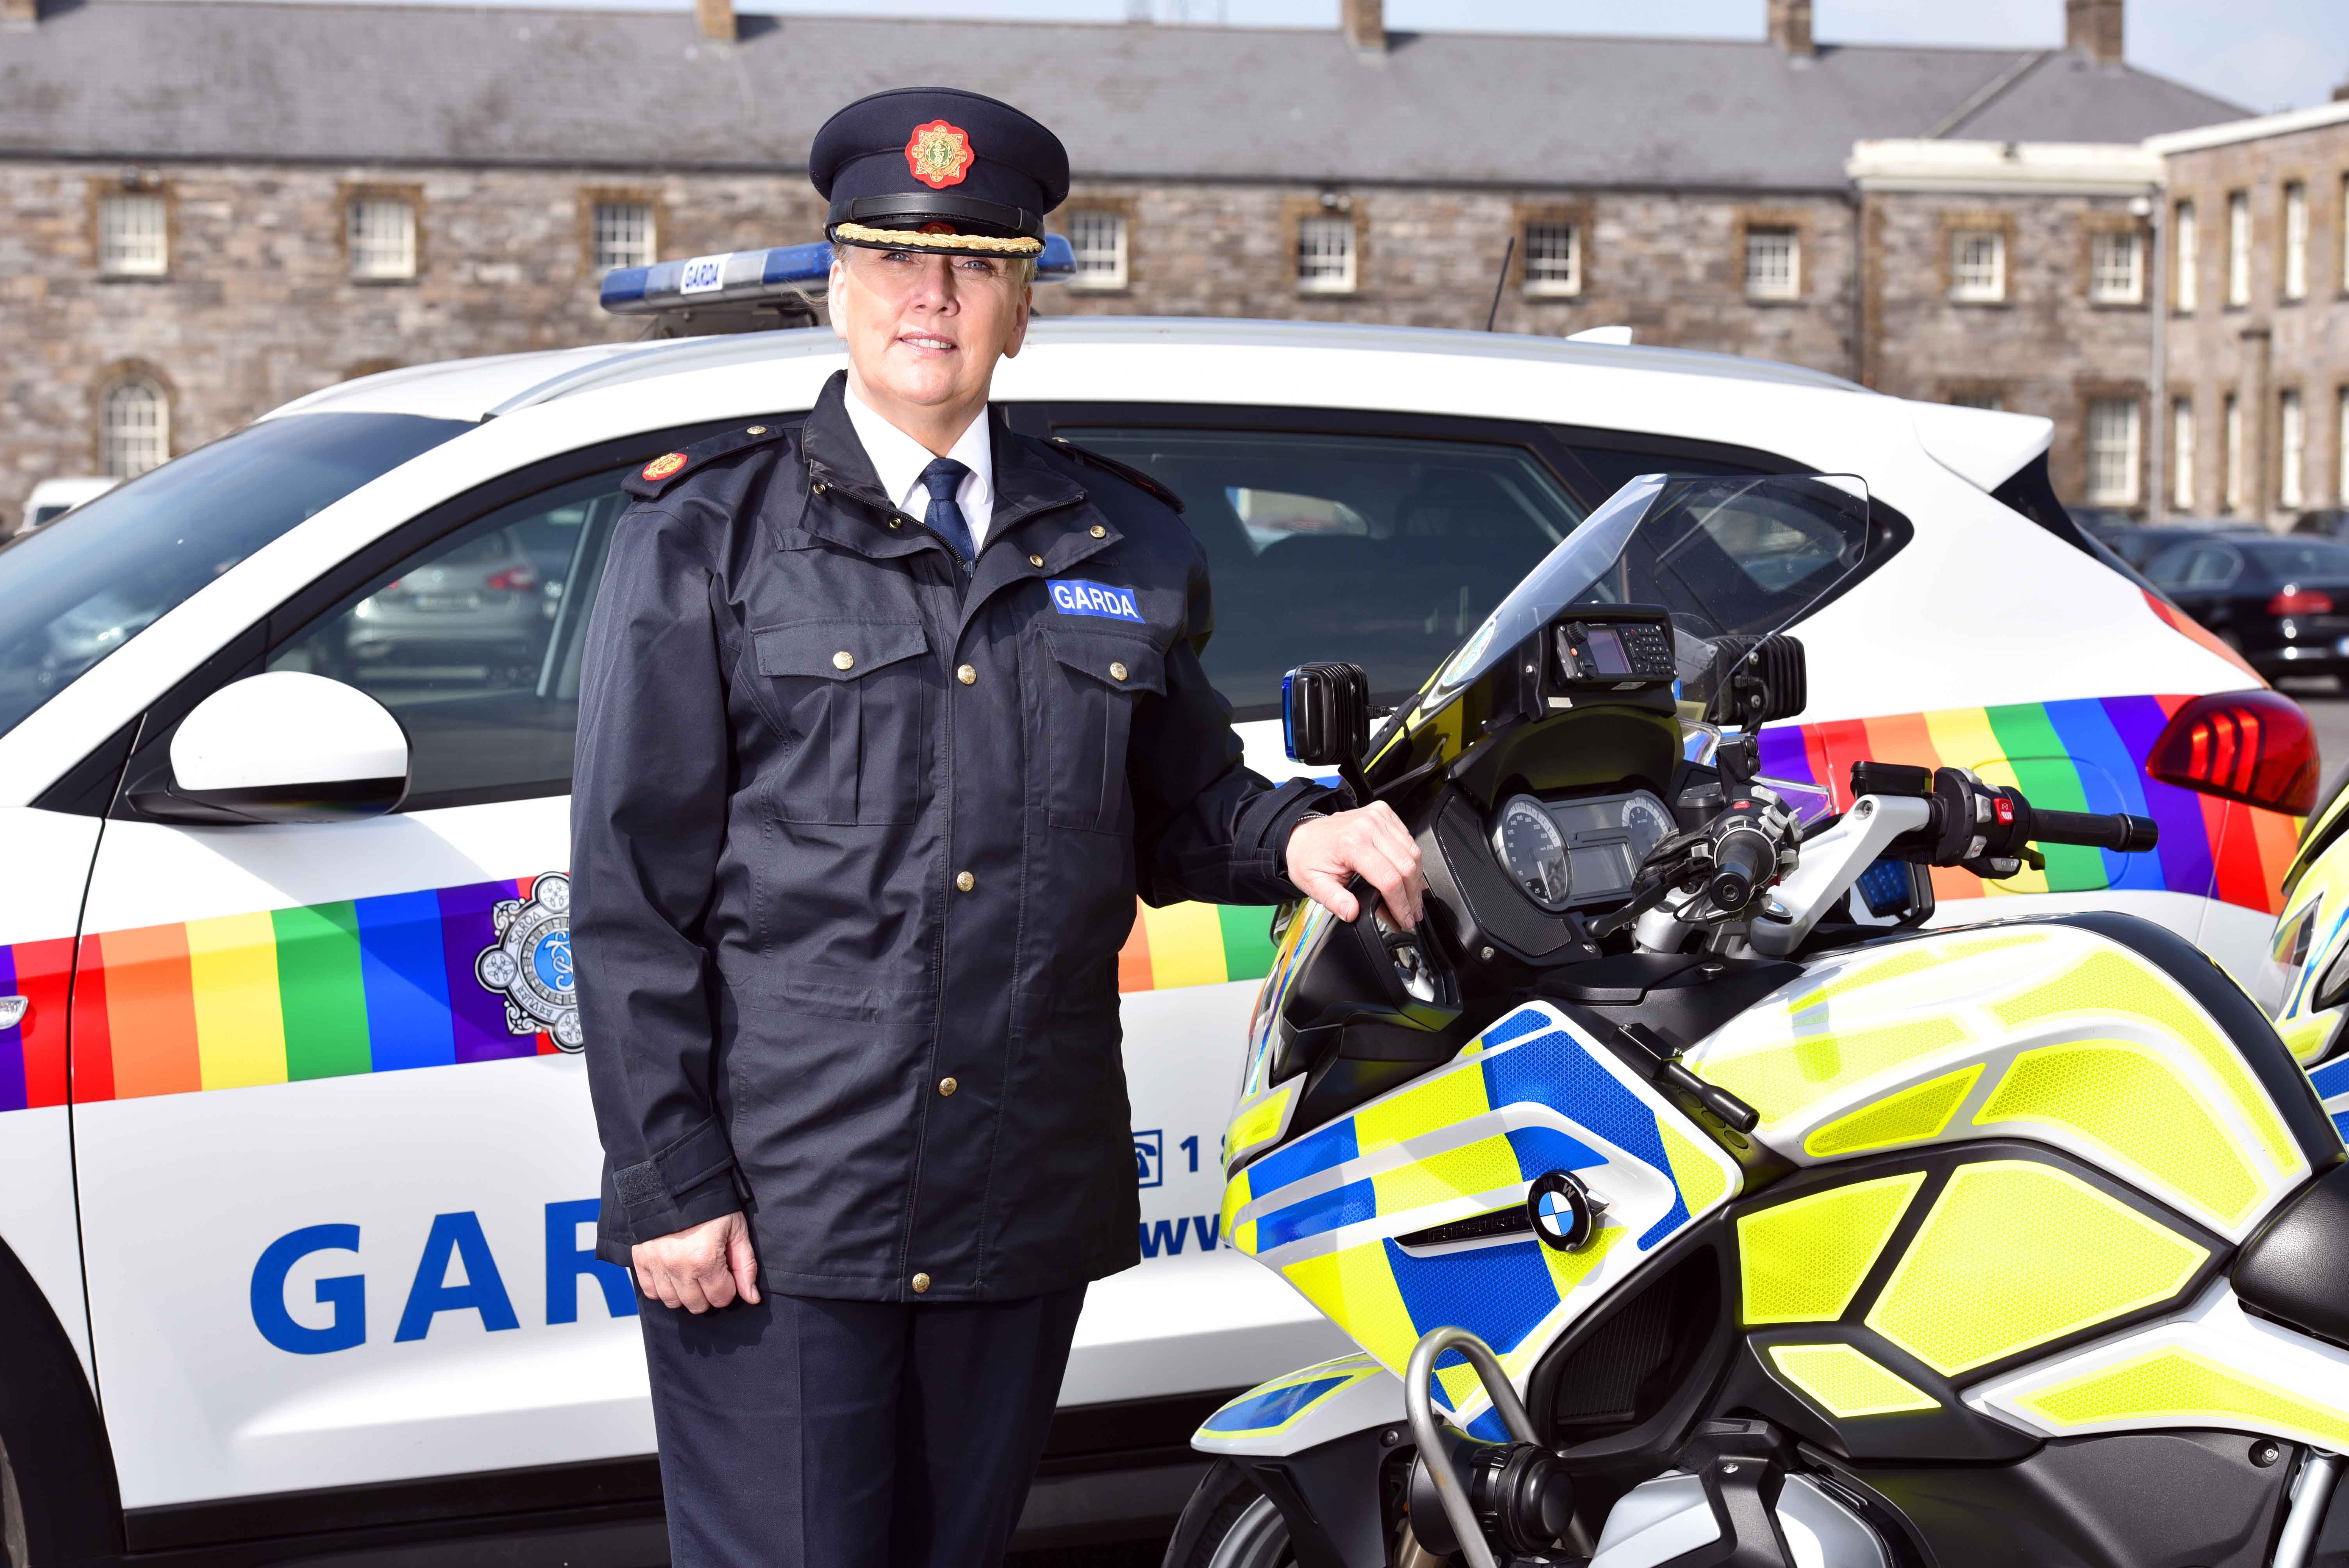 Assistant Commissioner Roads Policing and Community Engagement